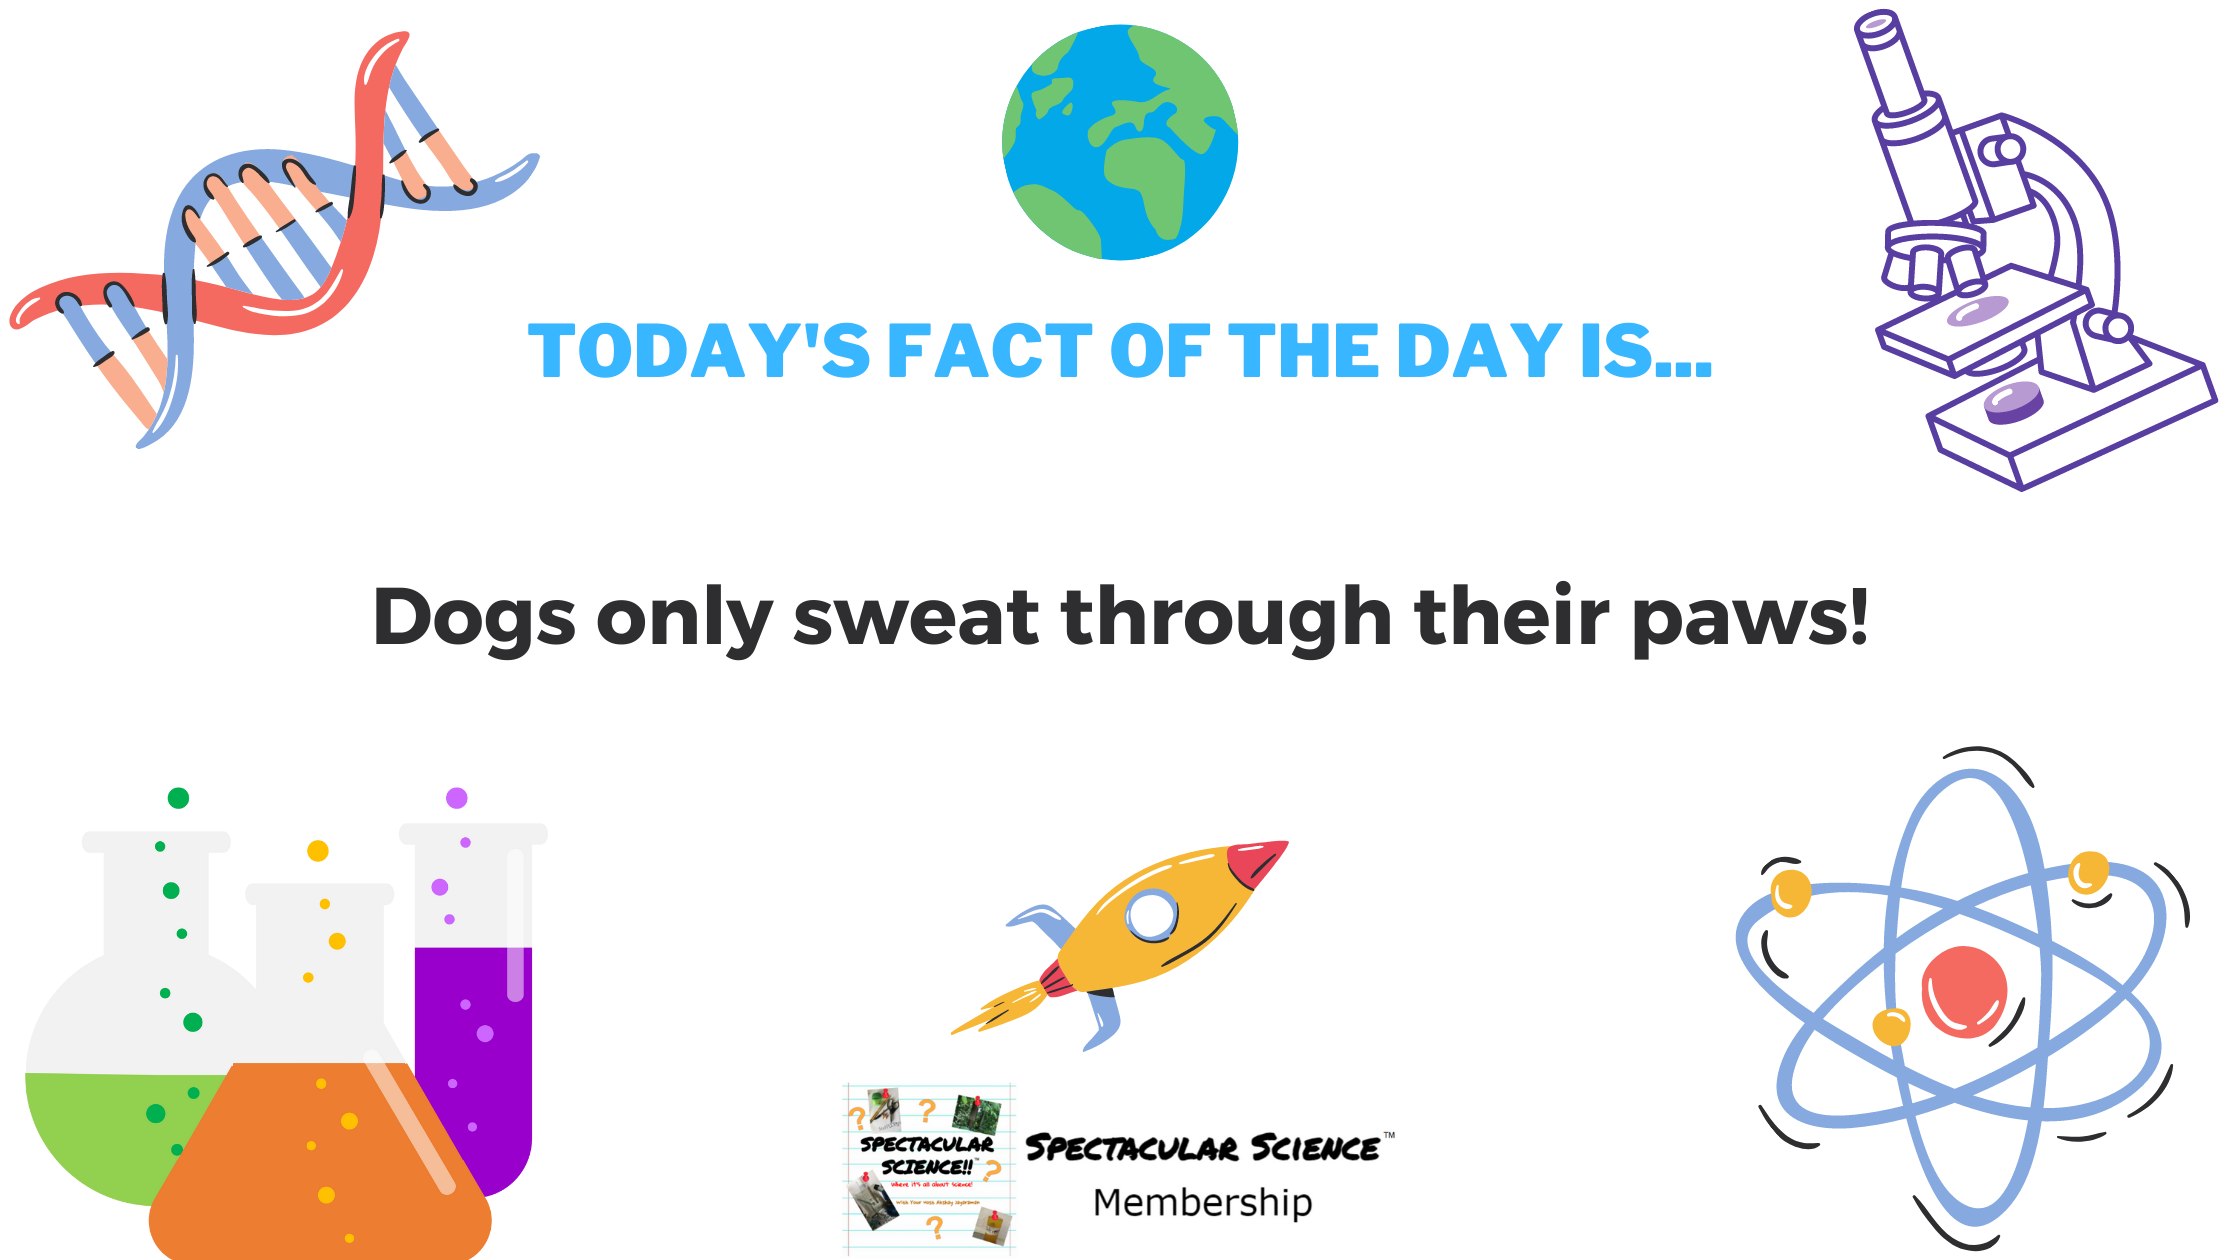 Fact of the Day Image May 10th